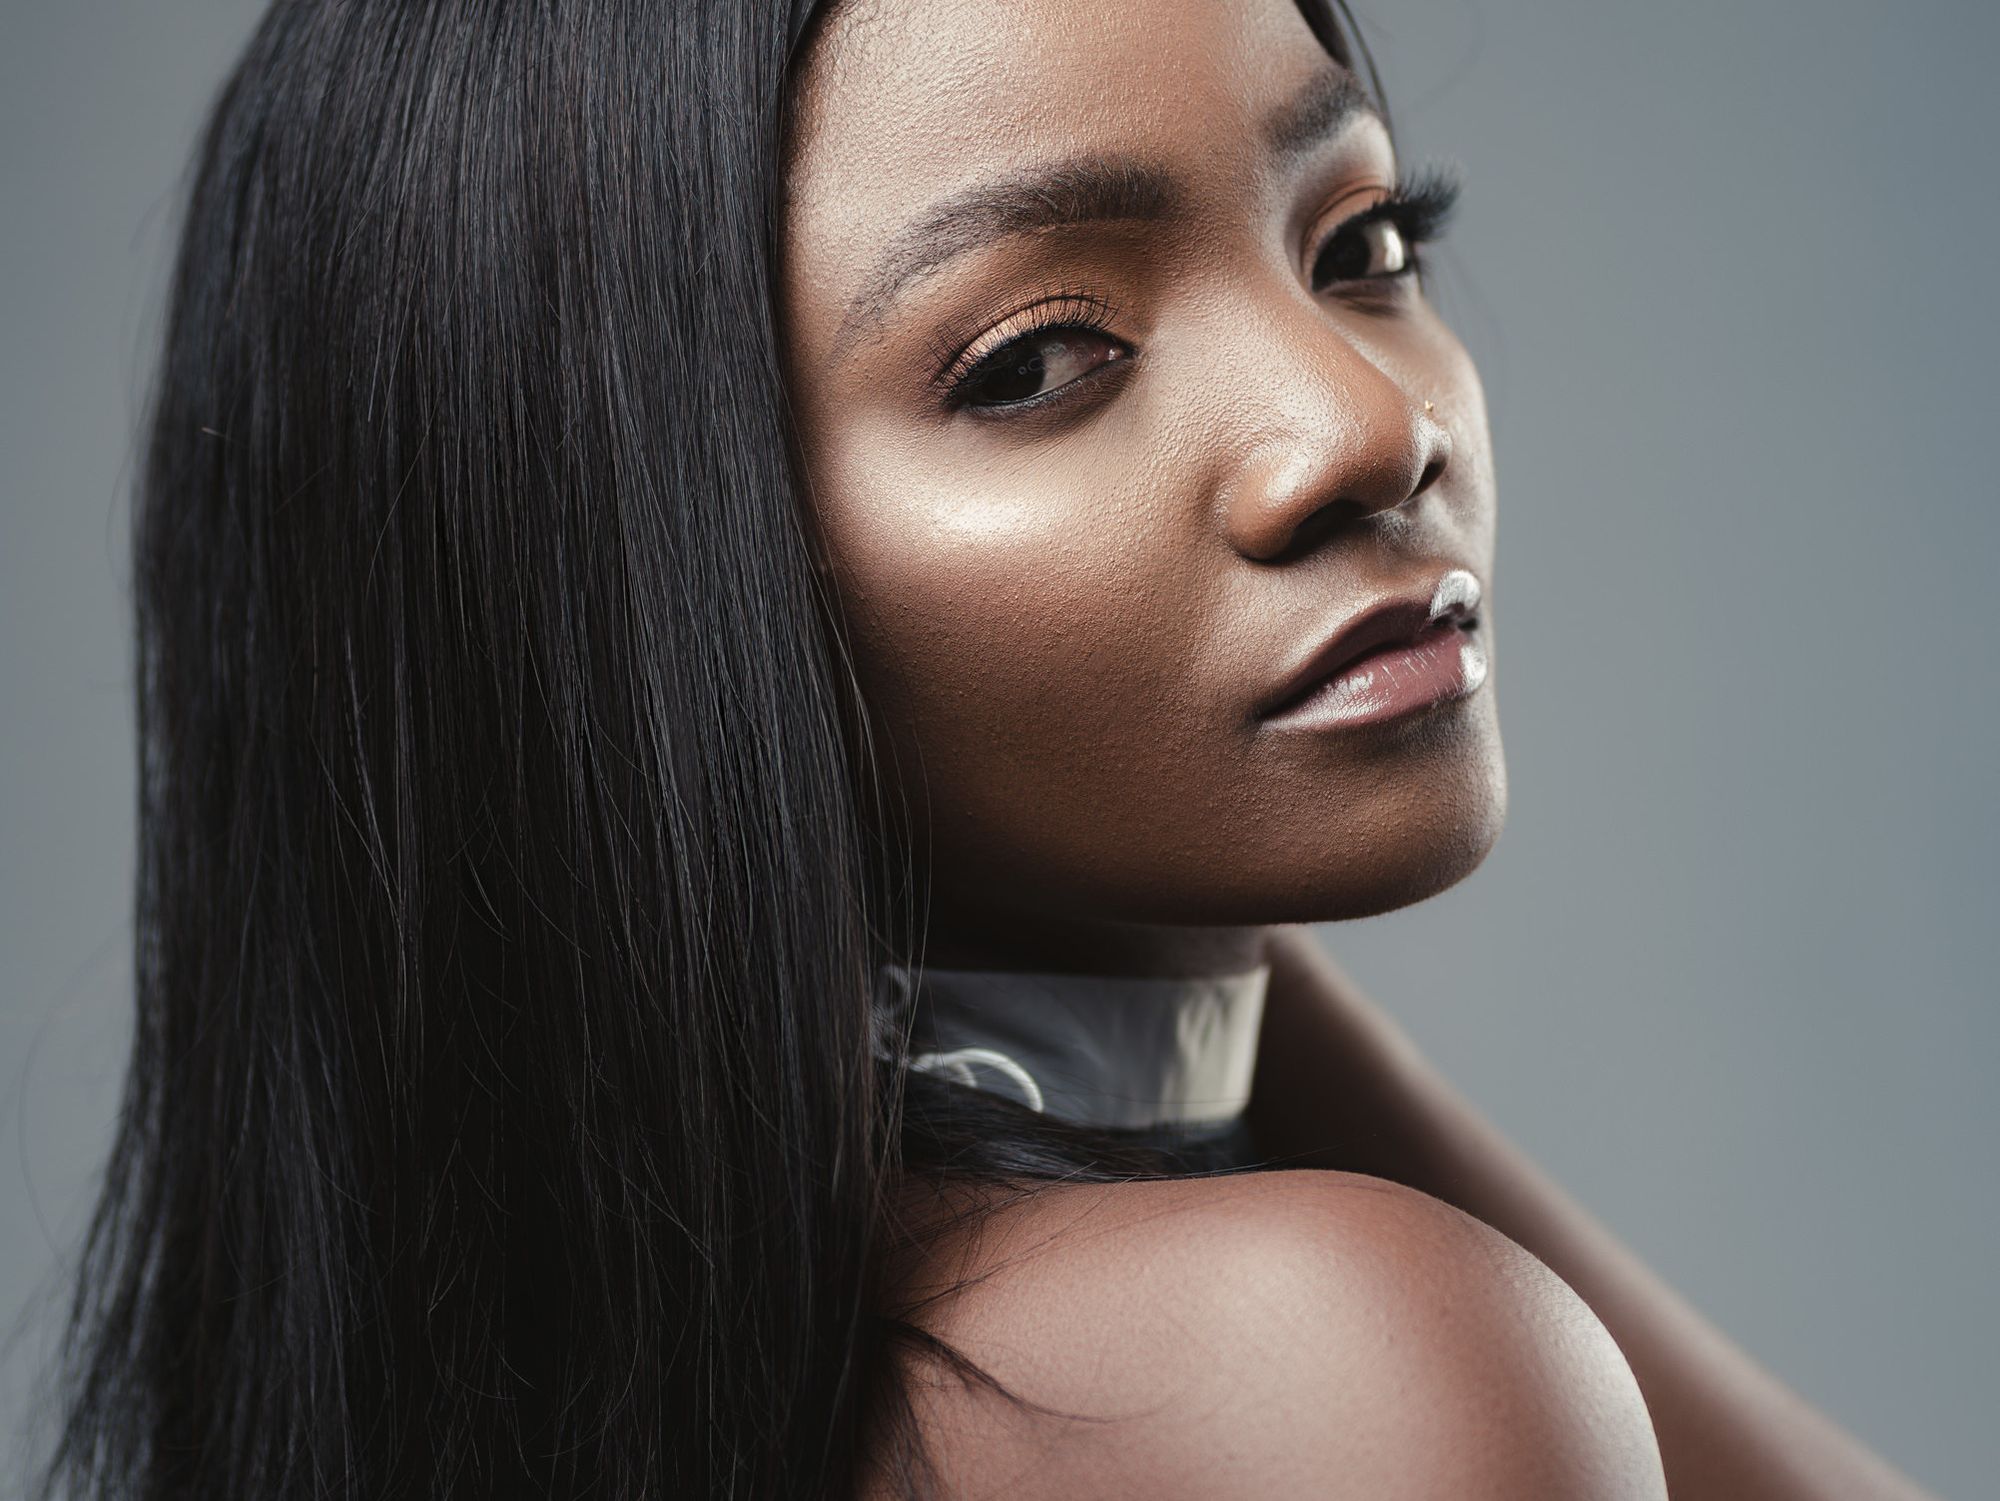 Interview: Simi Is Taking Risks